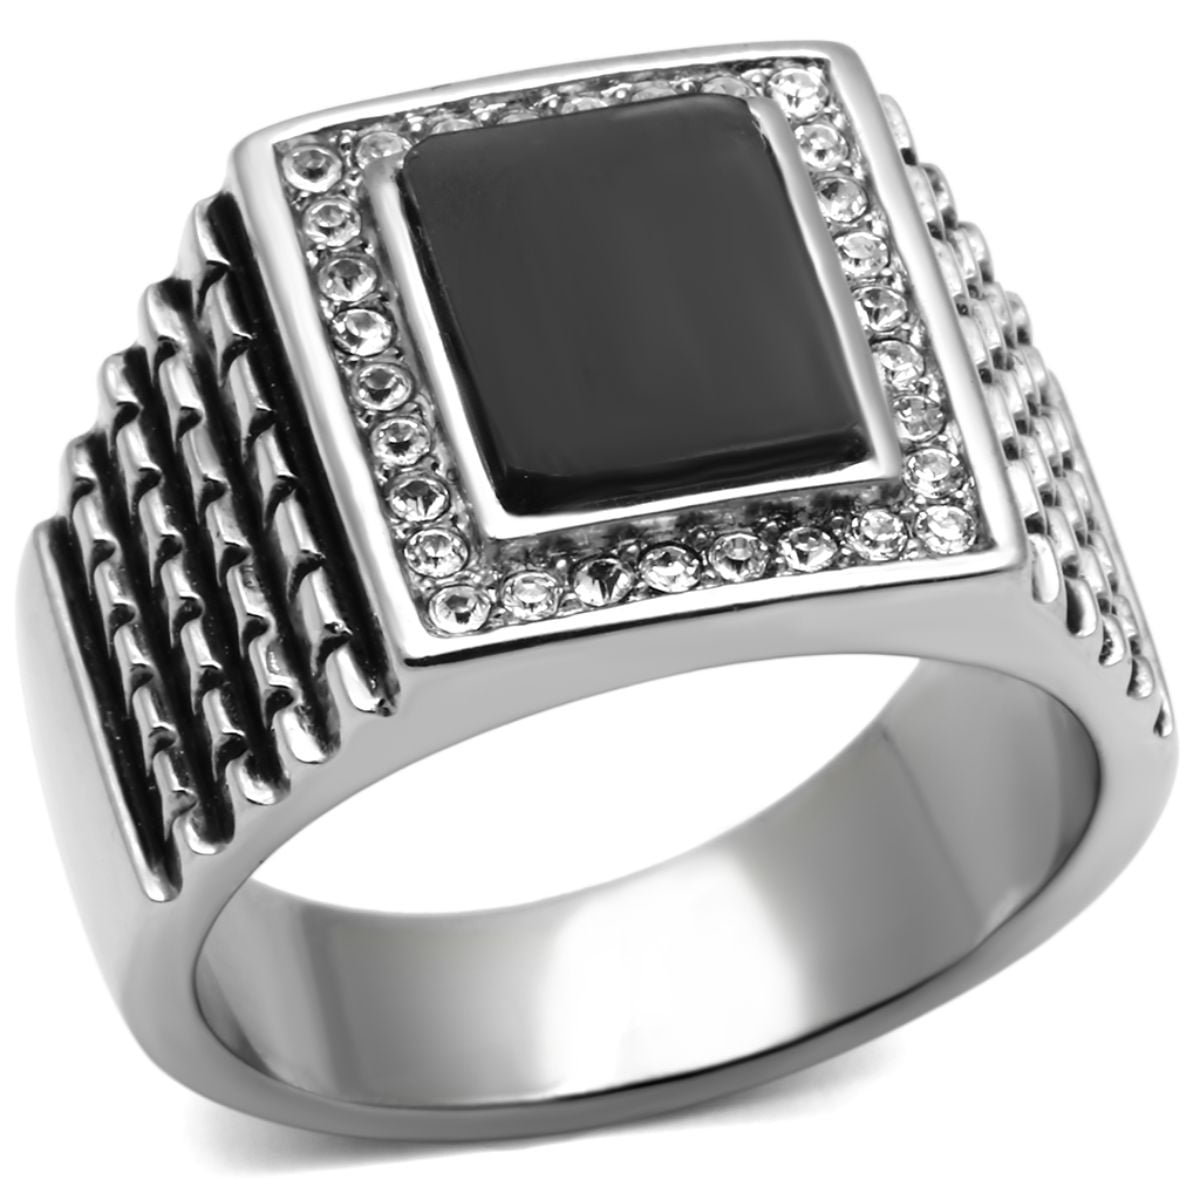 Men's Classy Synthetic Jet Black Stone Yellow Gold IP Stainless Ring 8-13 TK3221